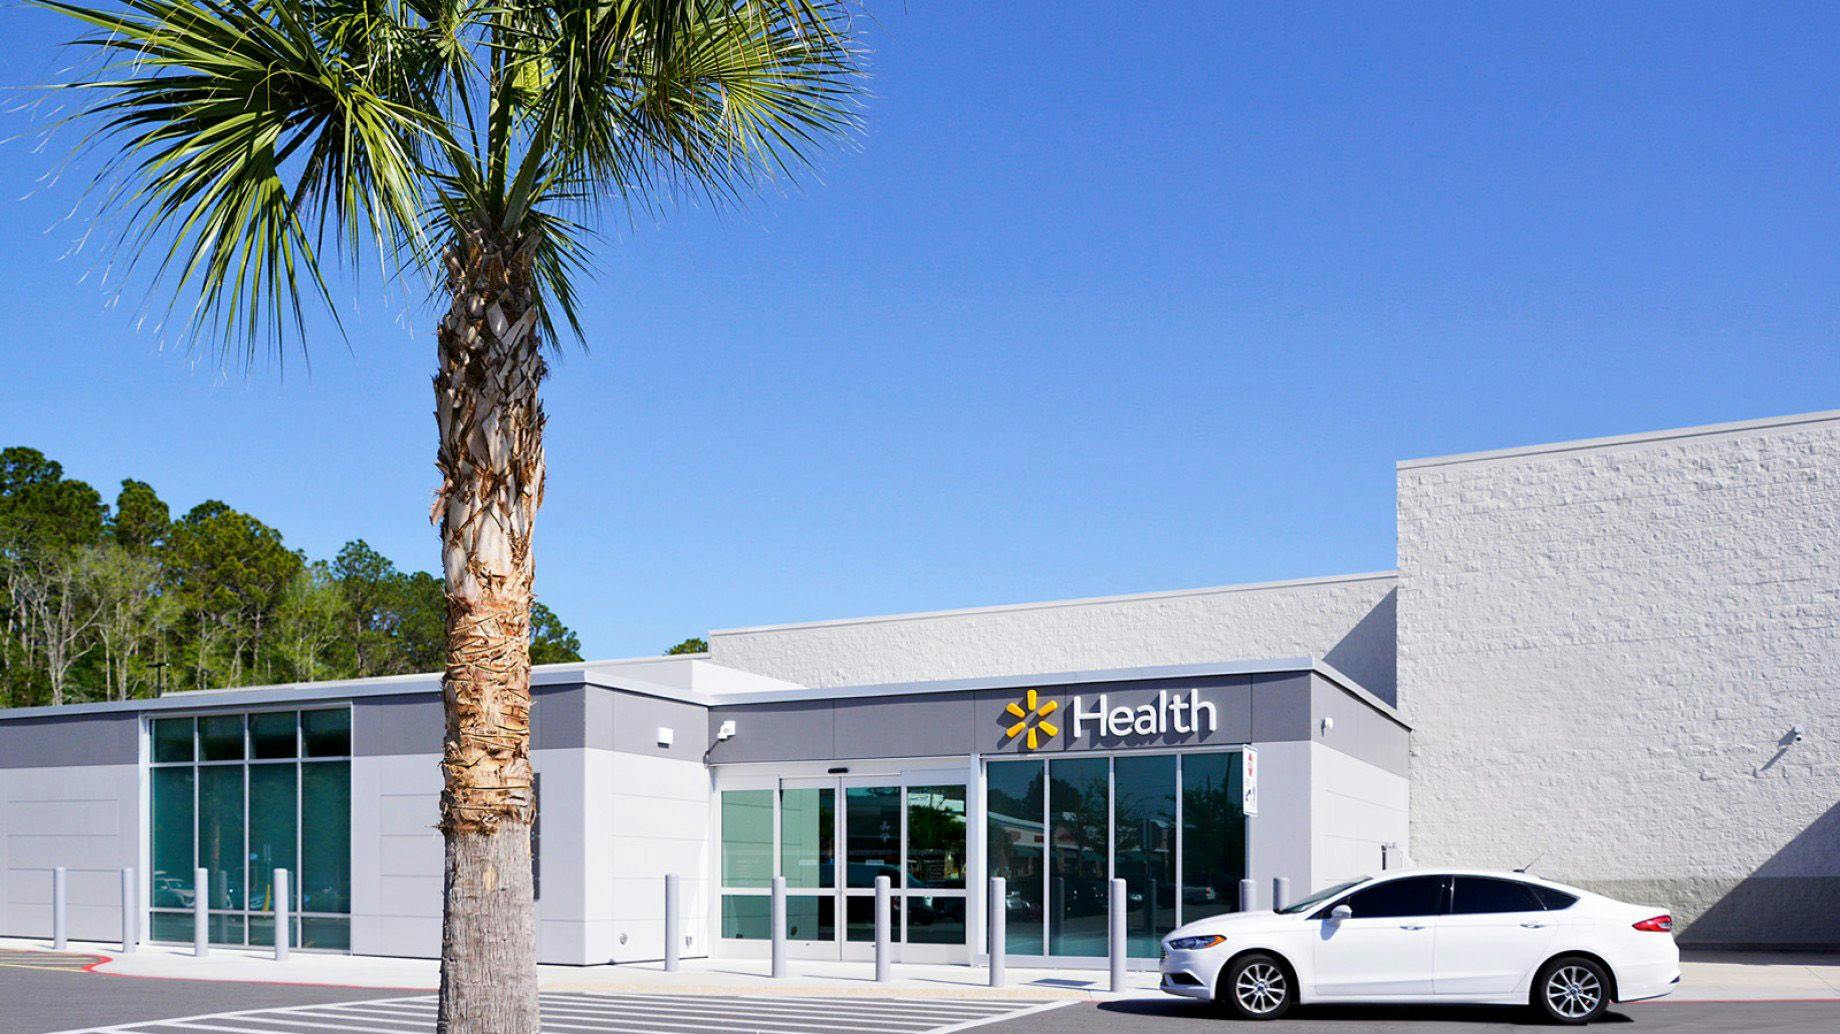 Walmart plans to add more Walmart Health Centers, such as this one in Florida, over the next year. (Image: Walmart)